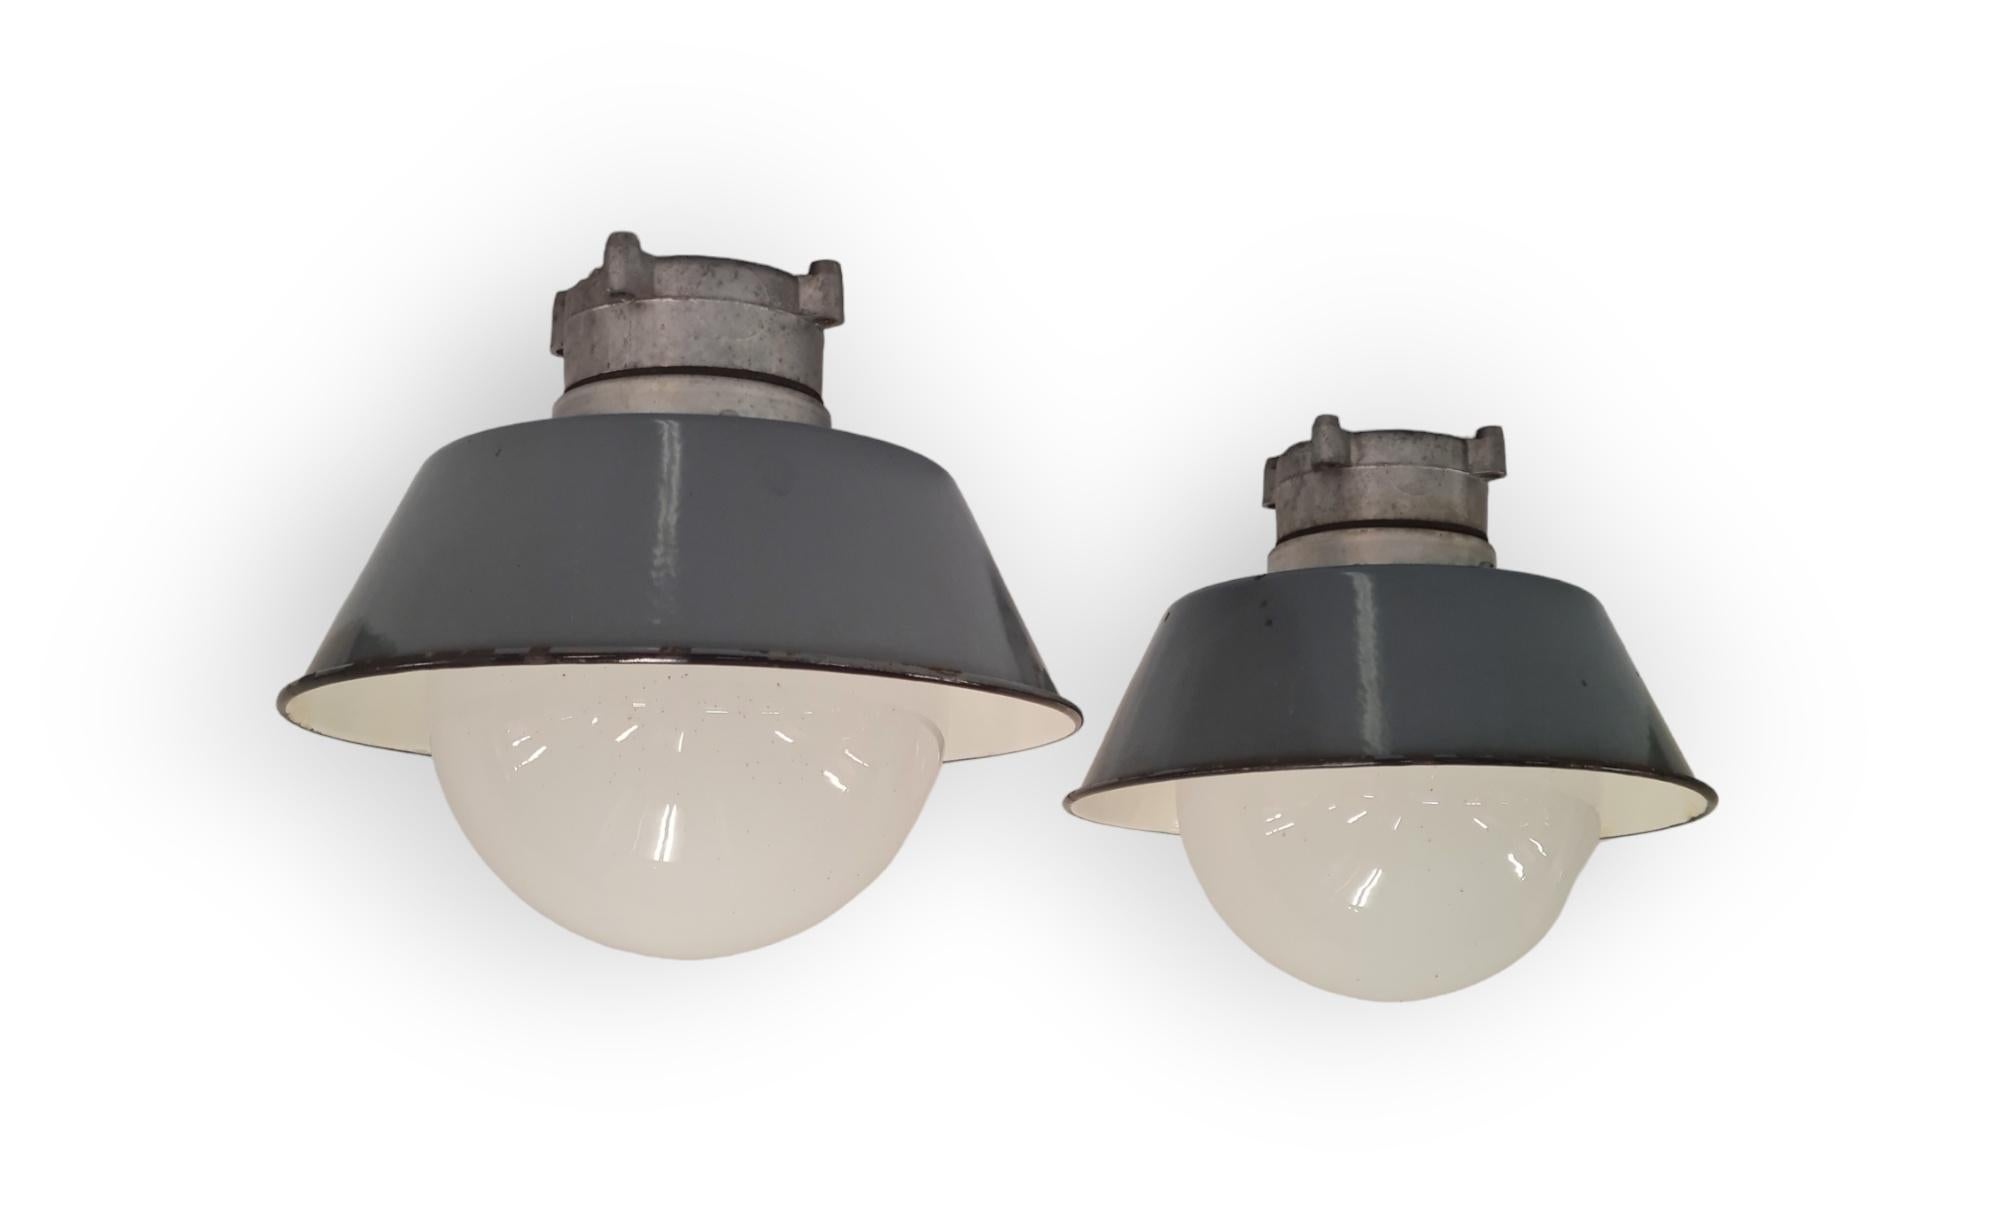 A pair of industrial style Paavo Tynell outdoor / indoor lamps. These lamps model H9-100 are a quite smaller than the other industrial pair we have listed on 1stdibs. Otherwise, they are similar in having an opaline glass ball shade that is easily